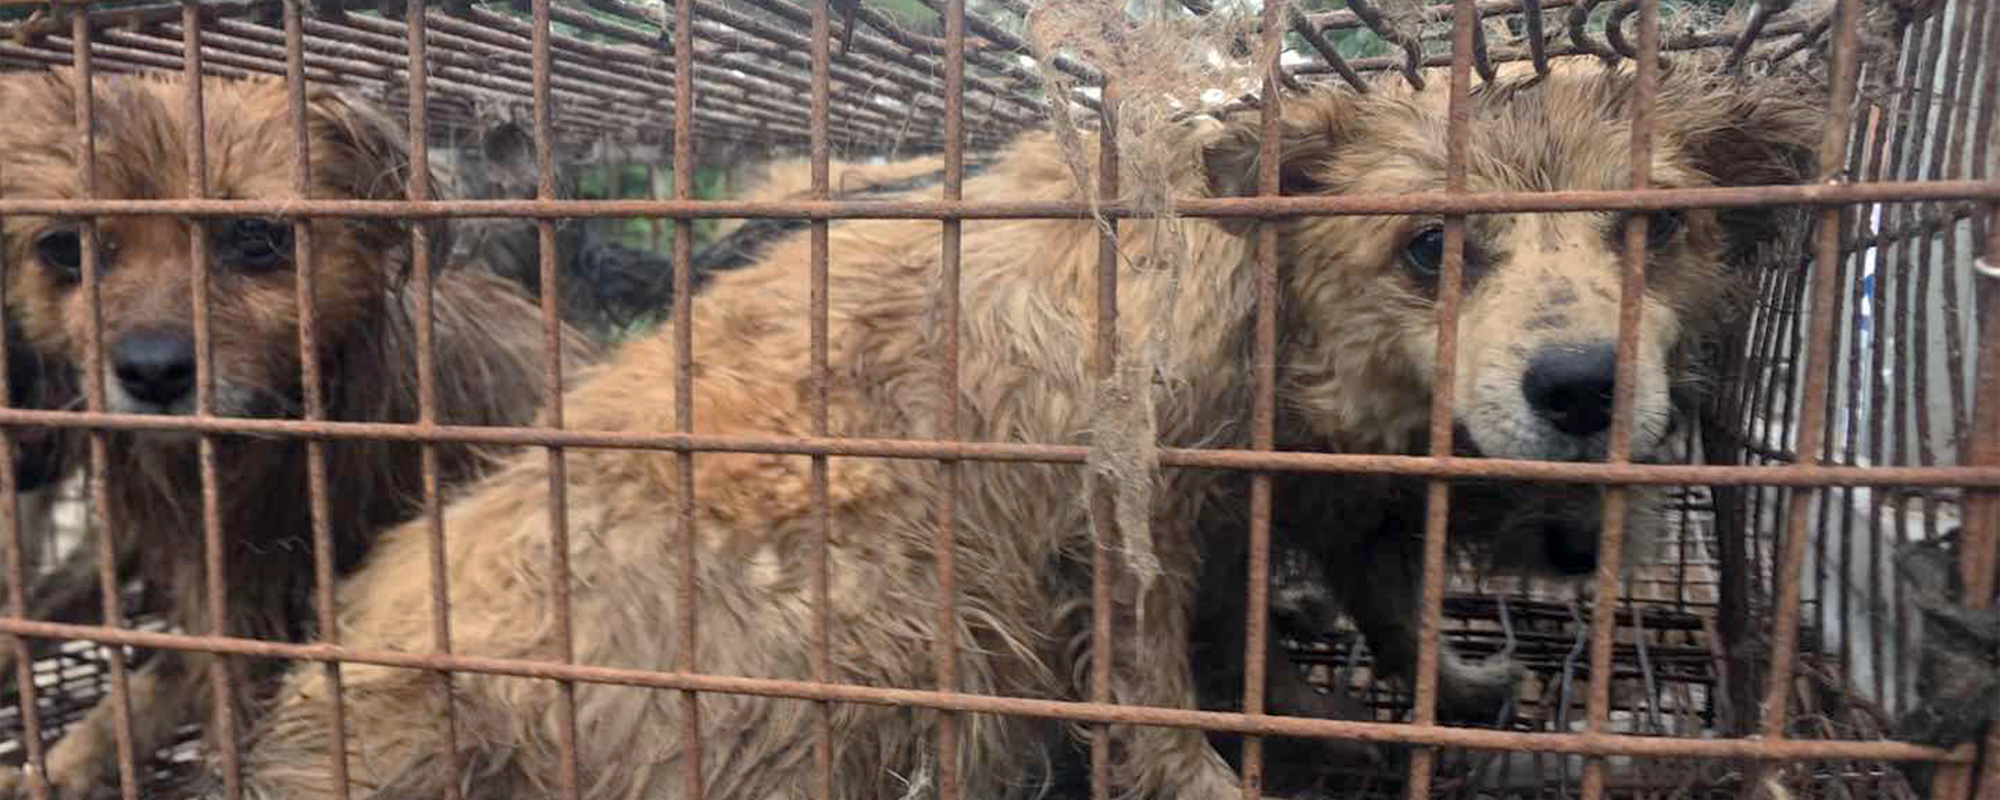 Dogs rescued from Yulin Dog Meat Festival